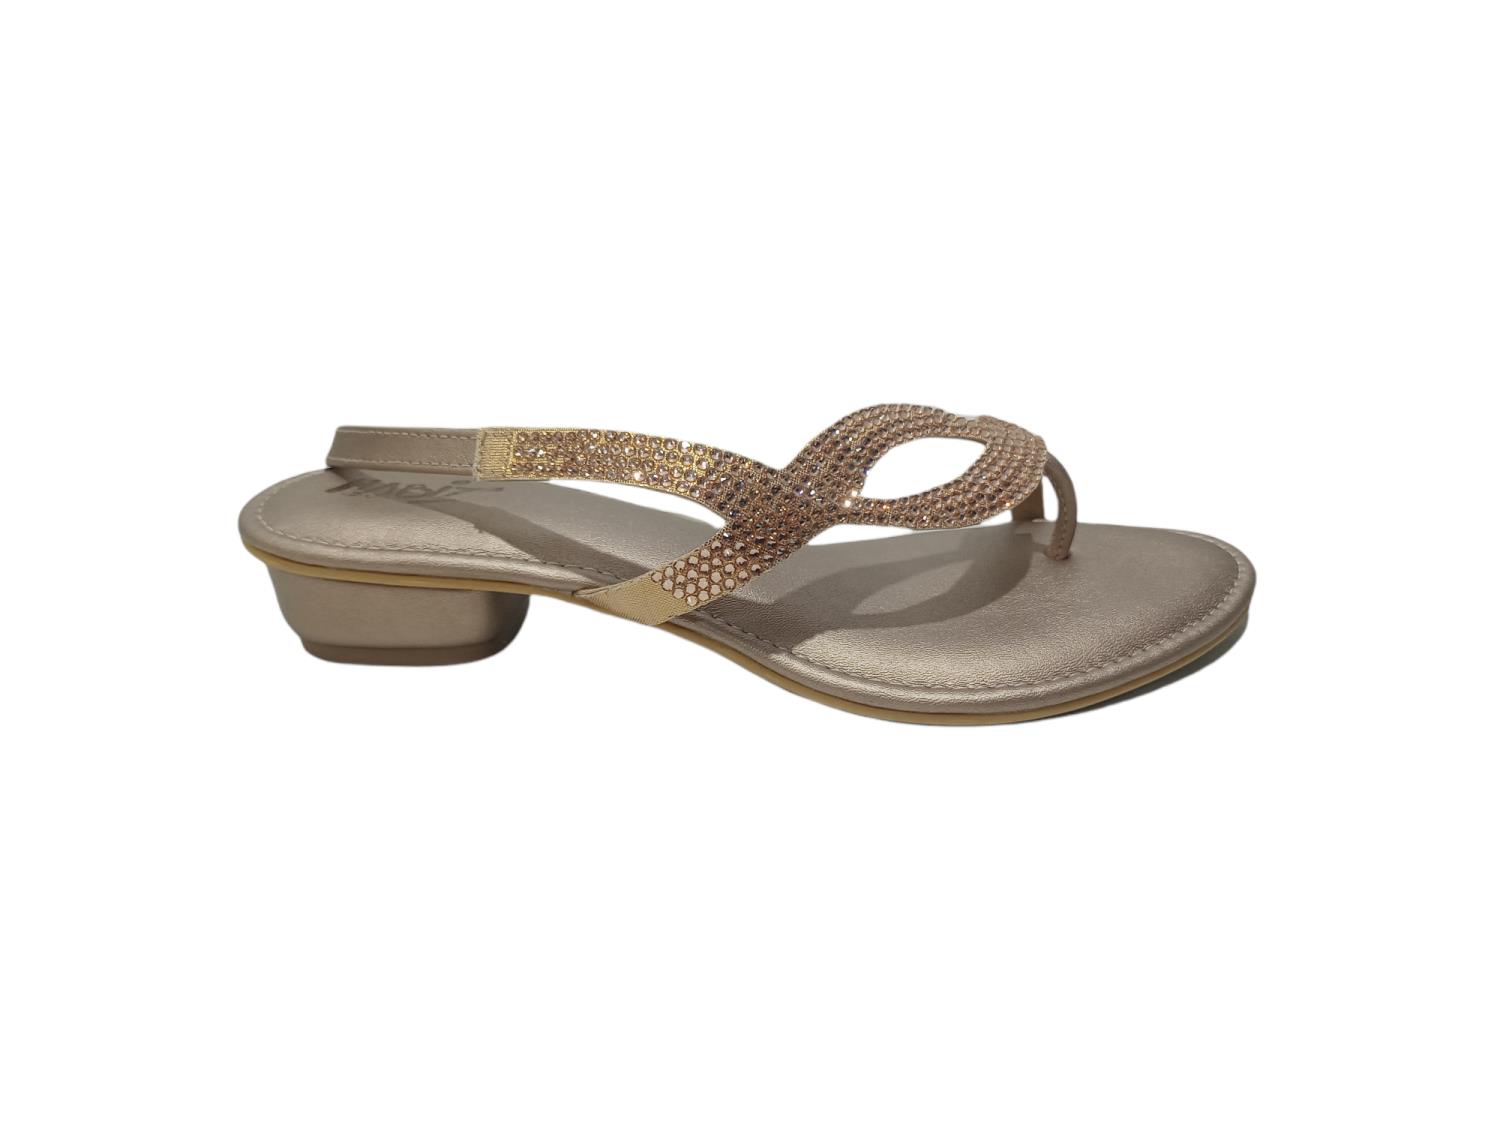 P.B.H. SULTAN SANDALS :: Online Shopping @ PARMAR BOOT HOUSE | Buy ...